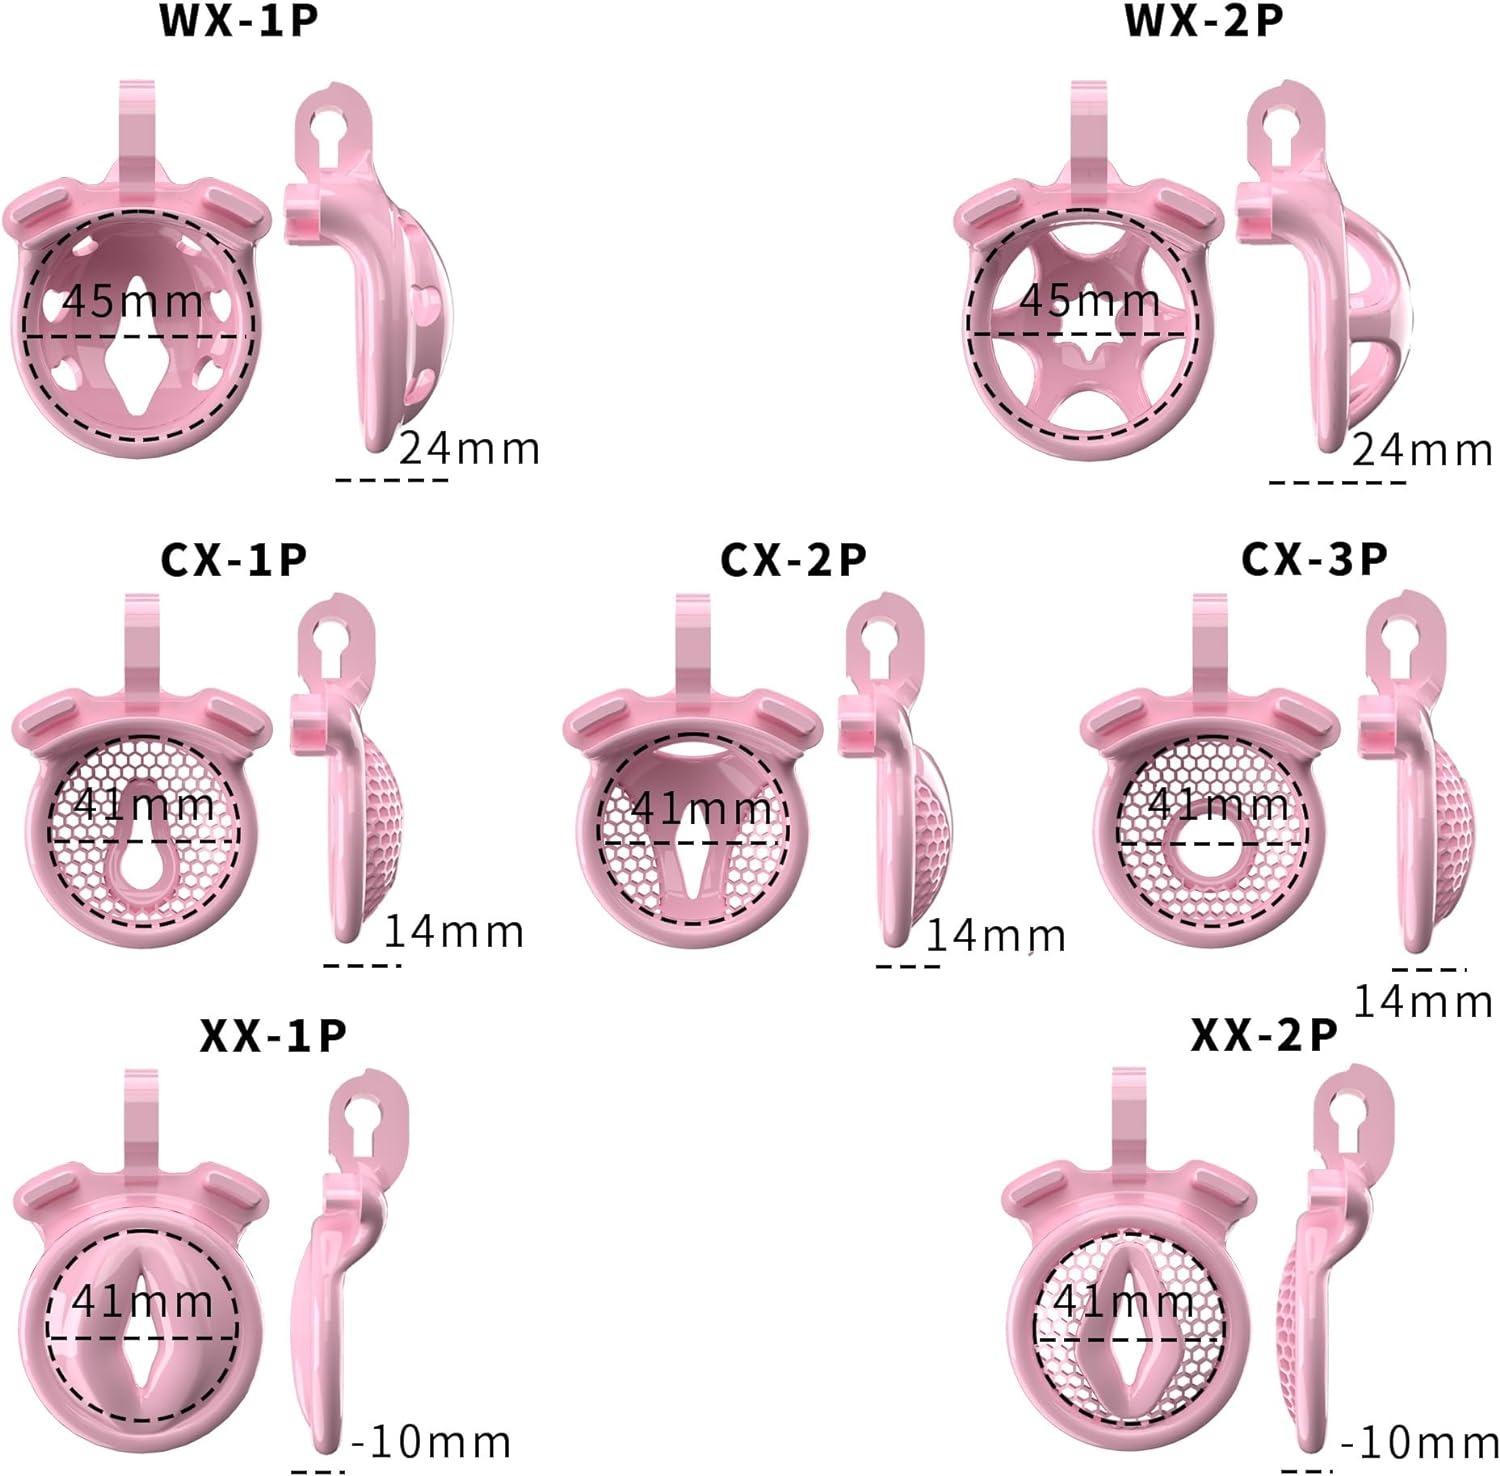 Sissy Chastity Cage for Men Pink Chastity Devices Lock Design Small Chastity Cage Male Penis Cage Cock Cage Toys for Couples Sex Pink,WX-4